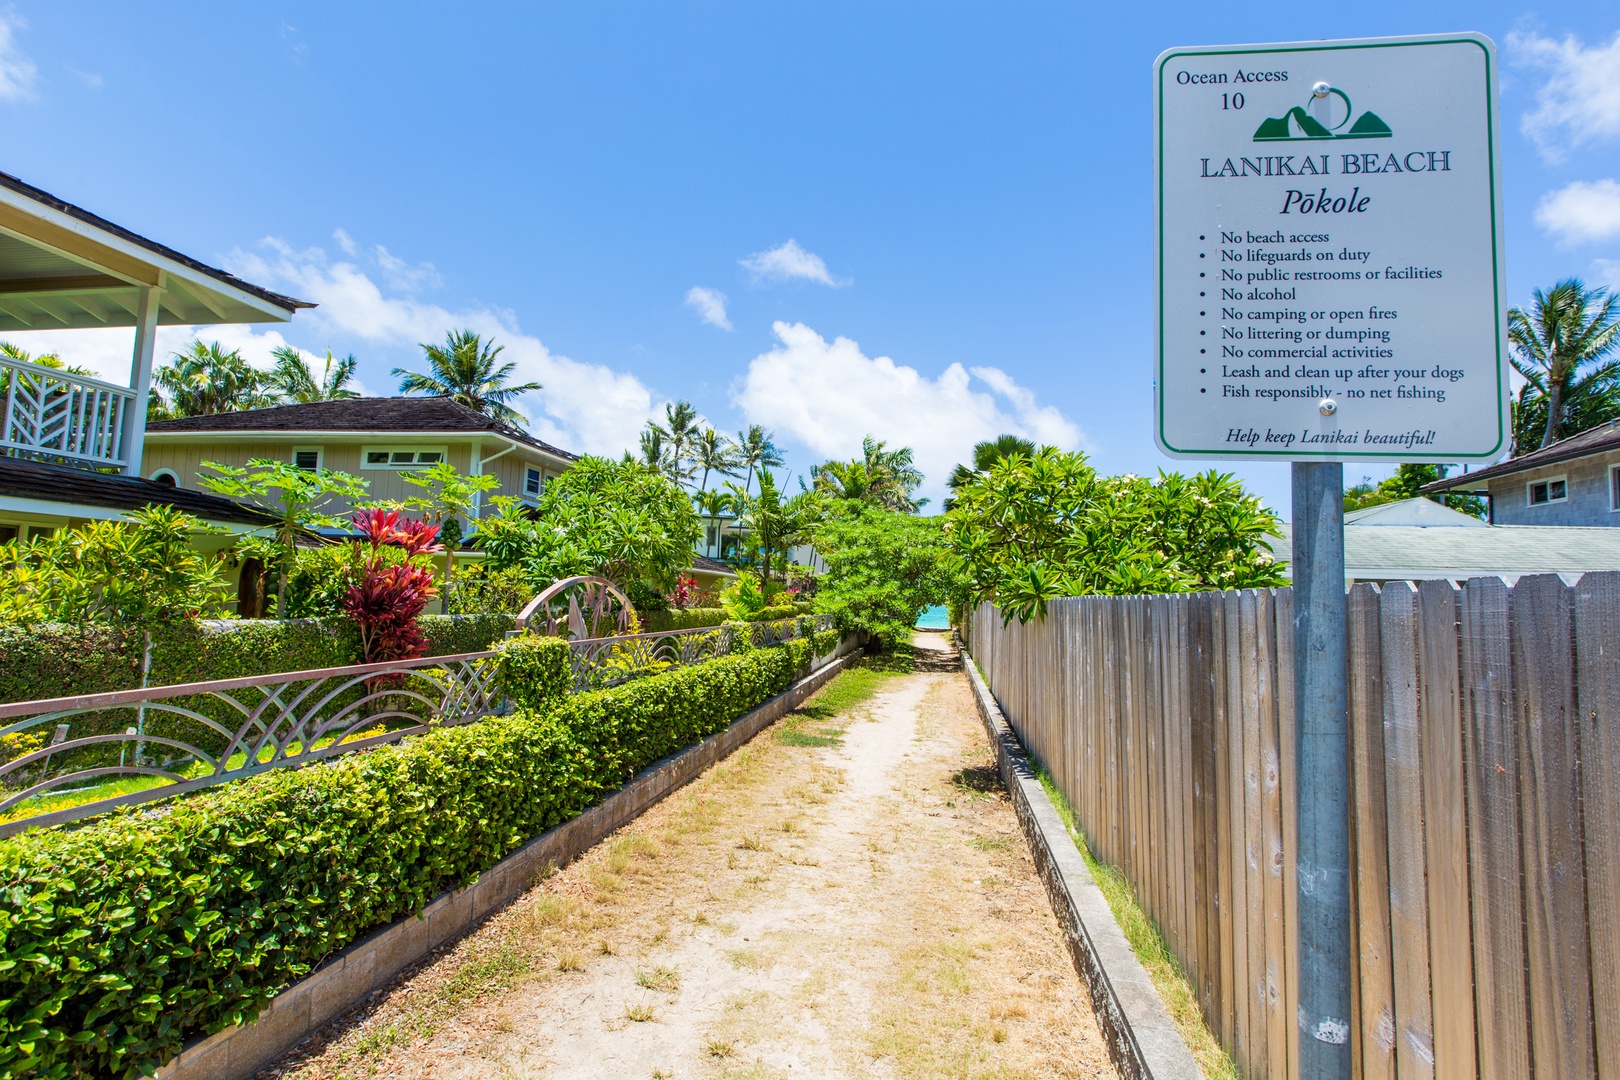 Kailua Vacation Rentals, Lanikai Cottage - The Pokole access to Lanikai Beach is only 0.1 miles (a two-minute walk) from the house!